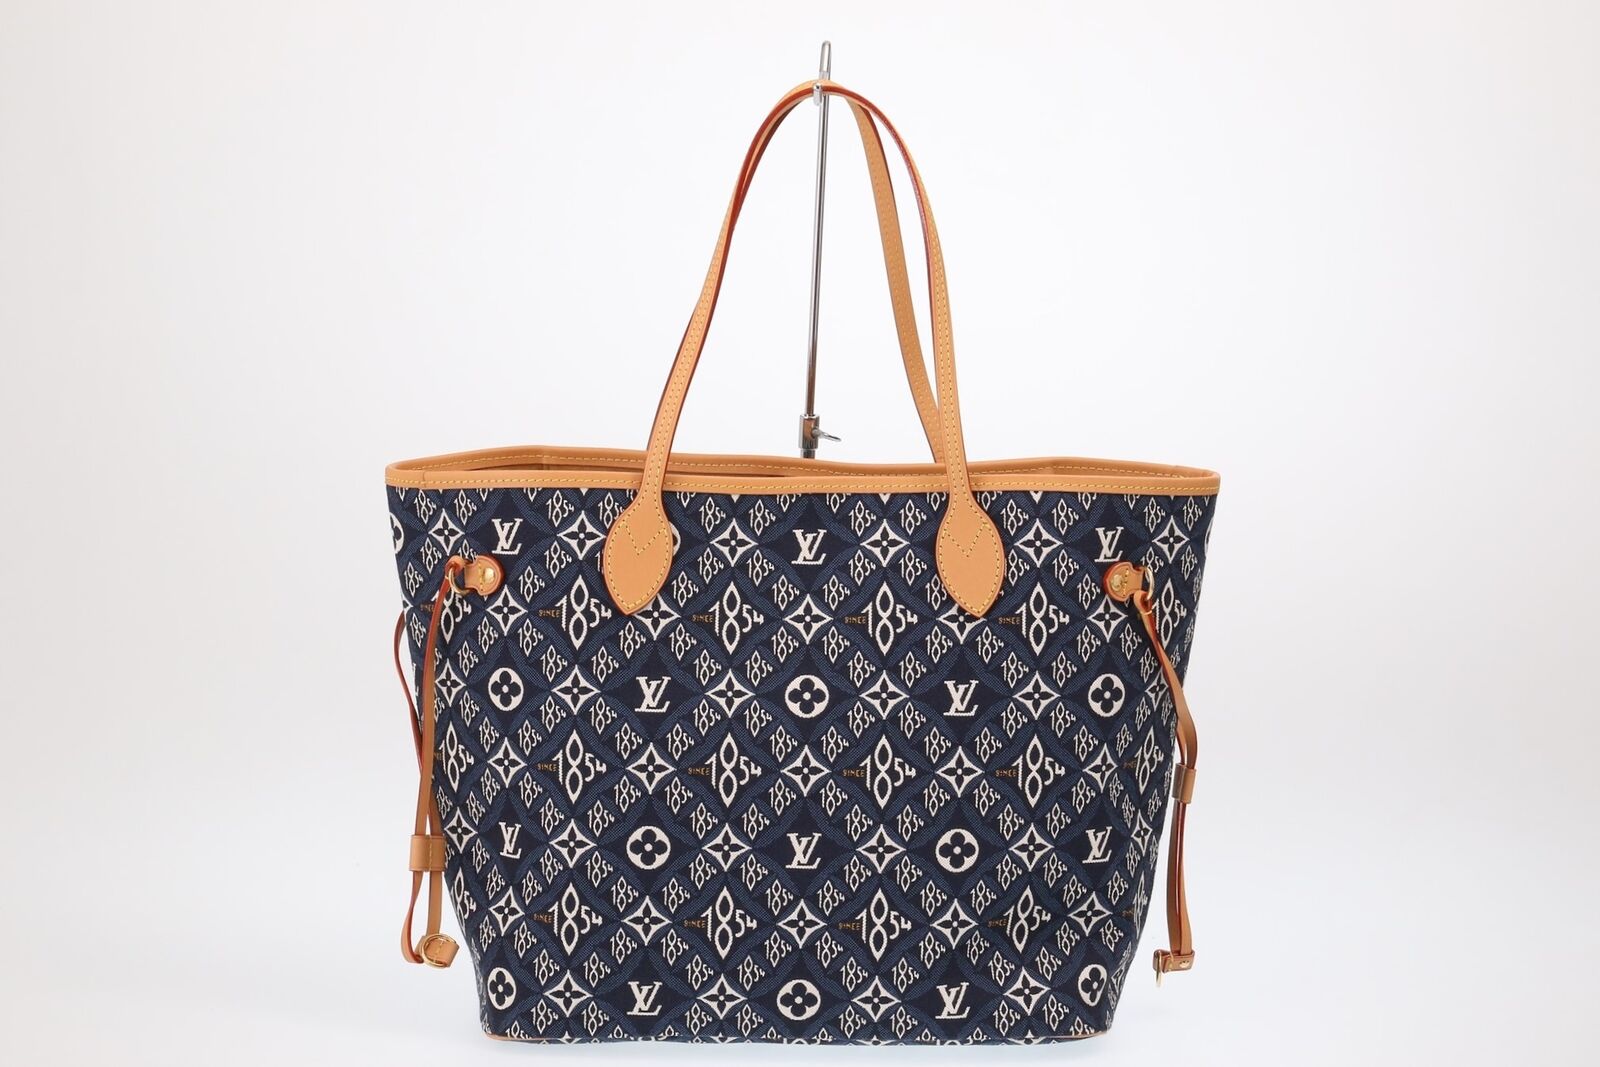 Louis Vuitton's Beloved 'Since 1854' Collection Now Comes In A New